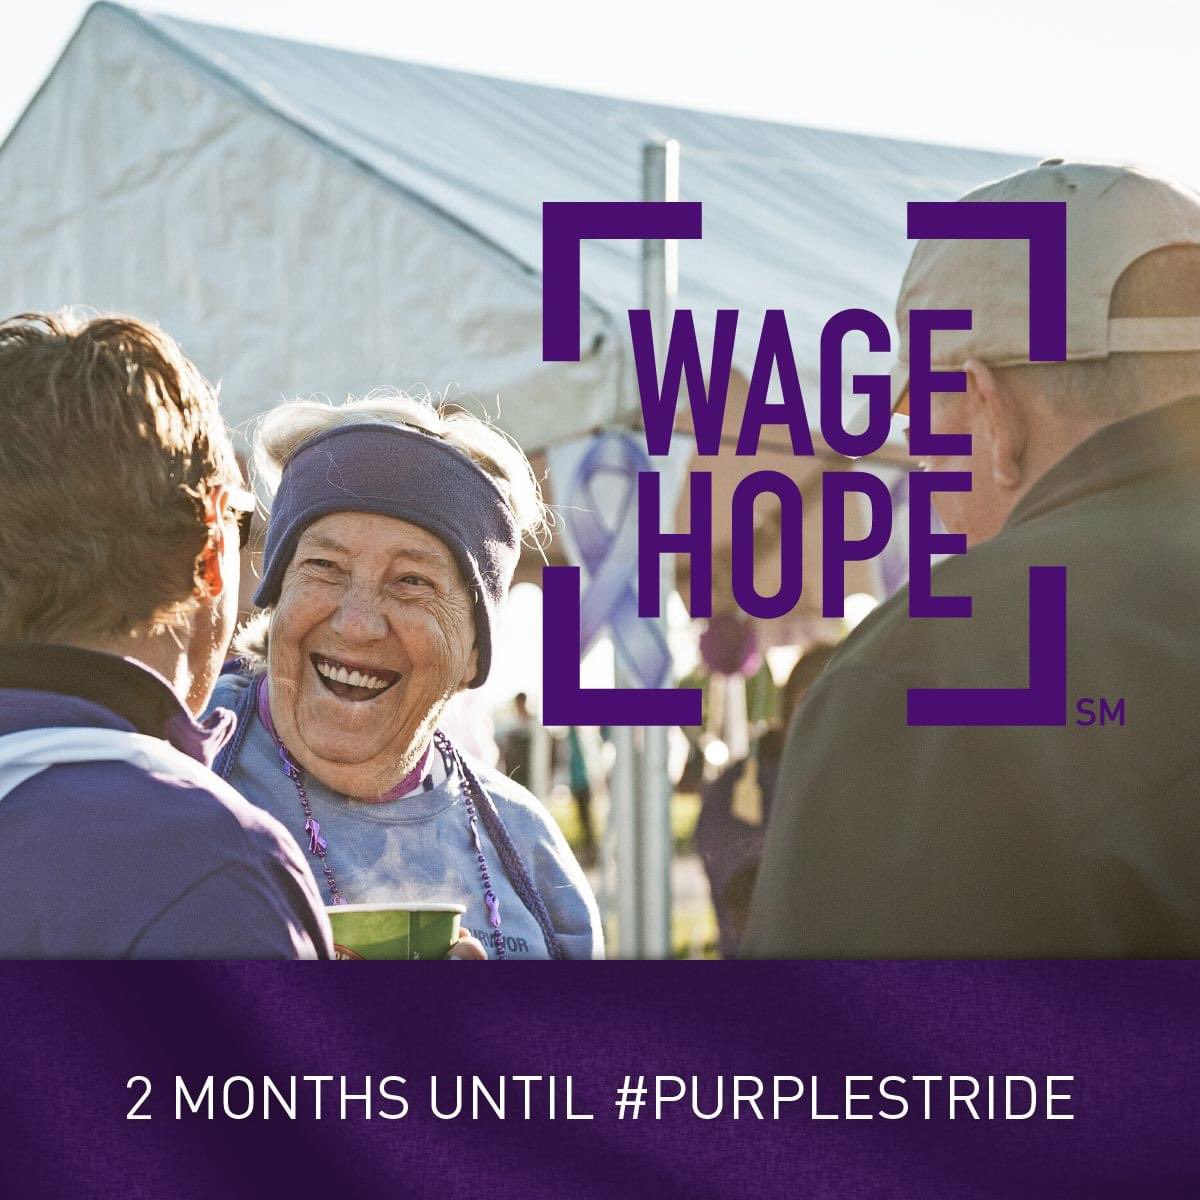 Only two months left until PurpleStride New Jersey! Start your team for FREE and join us in Parsippany on April 27th! PurpleStride.org/NJ